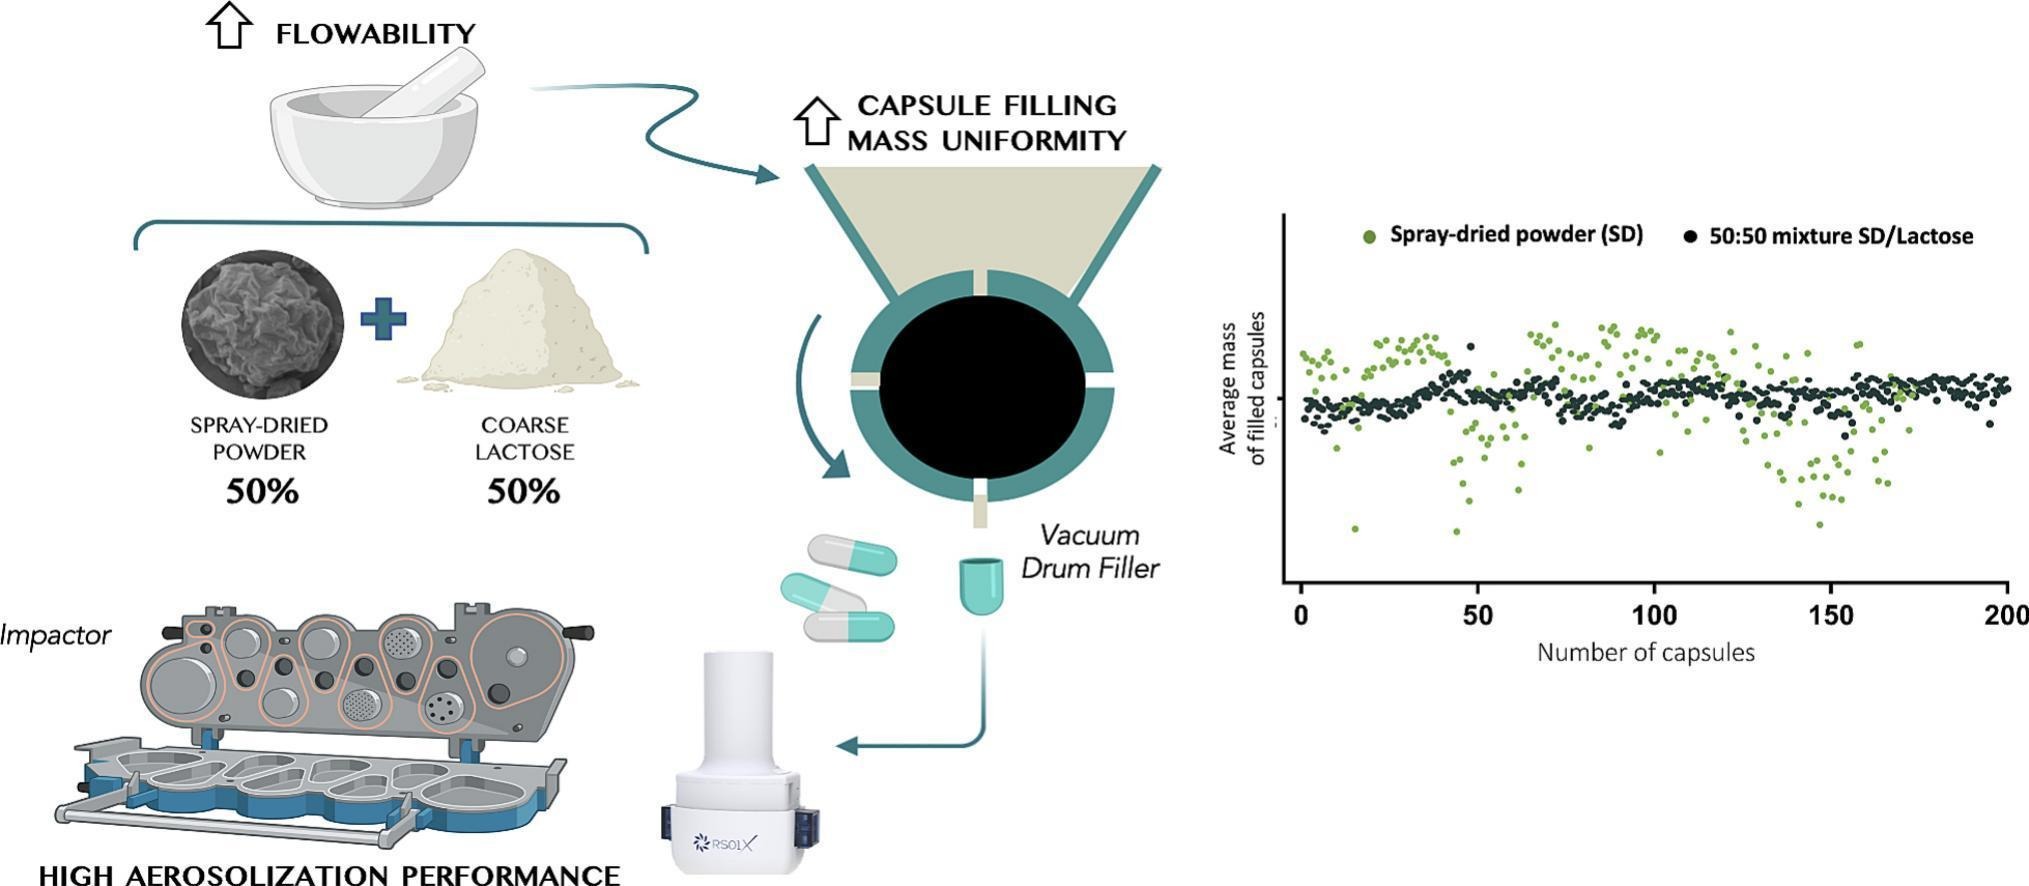 Enhancement of inhaled micronized powder flow properties for accurate capsules filling